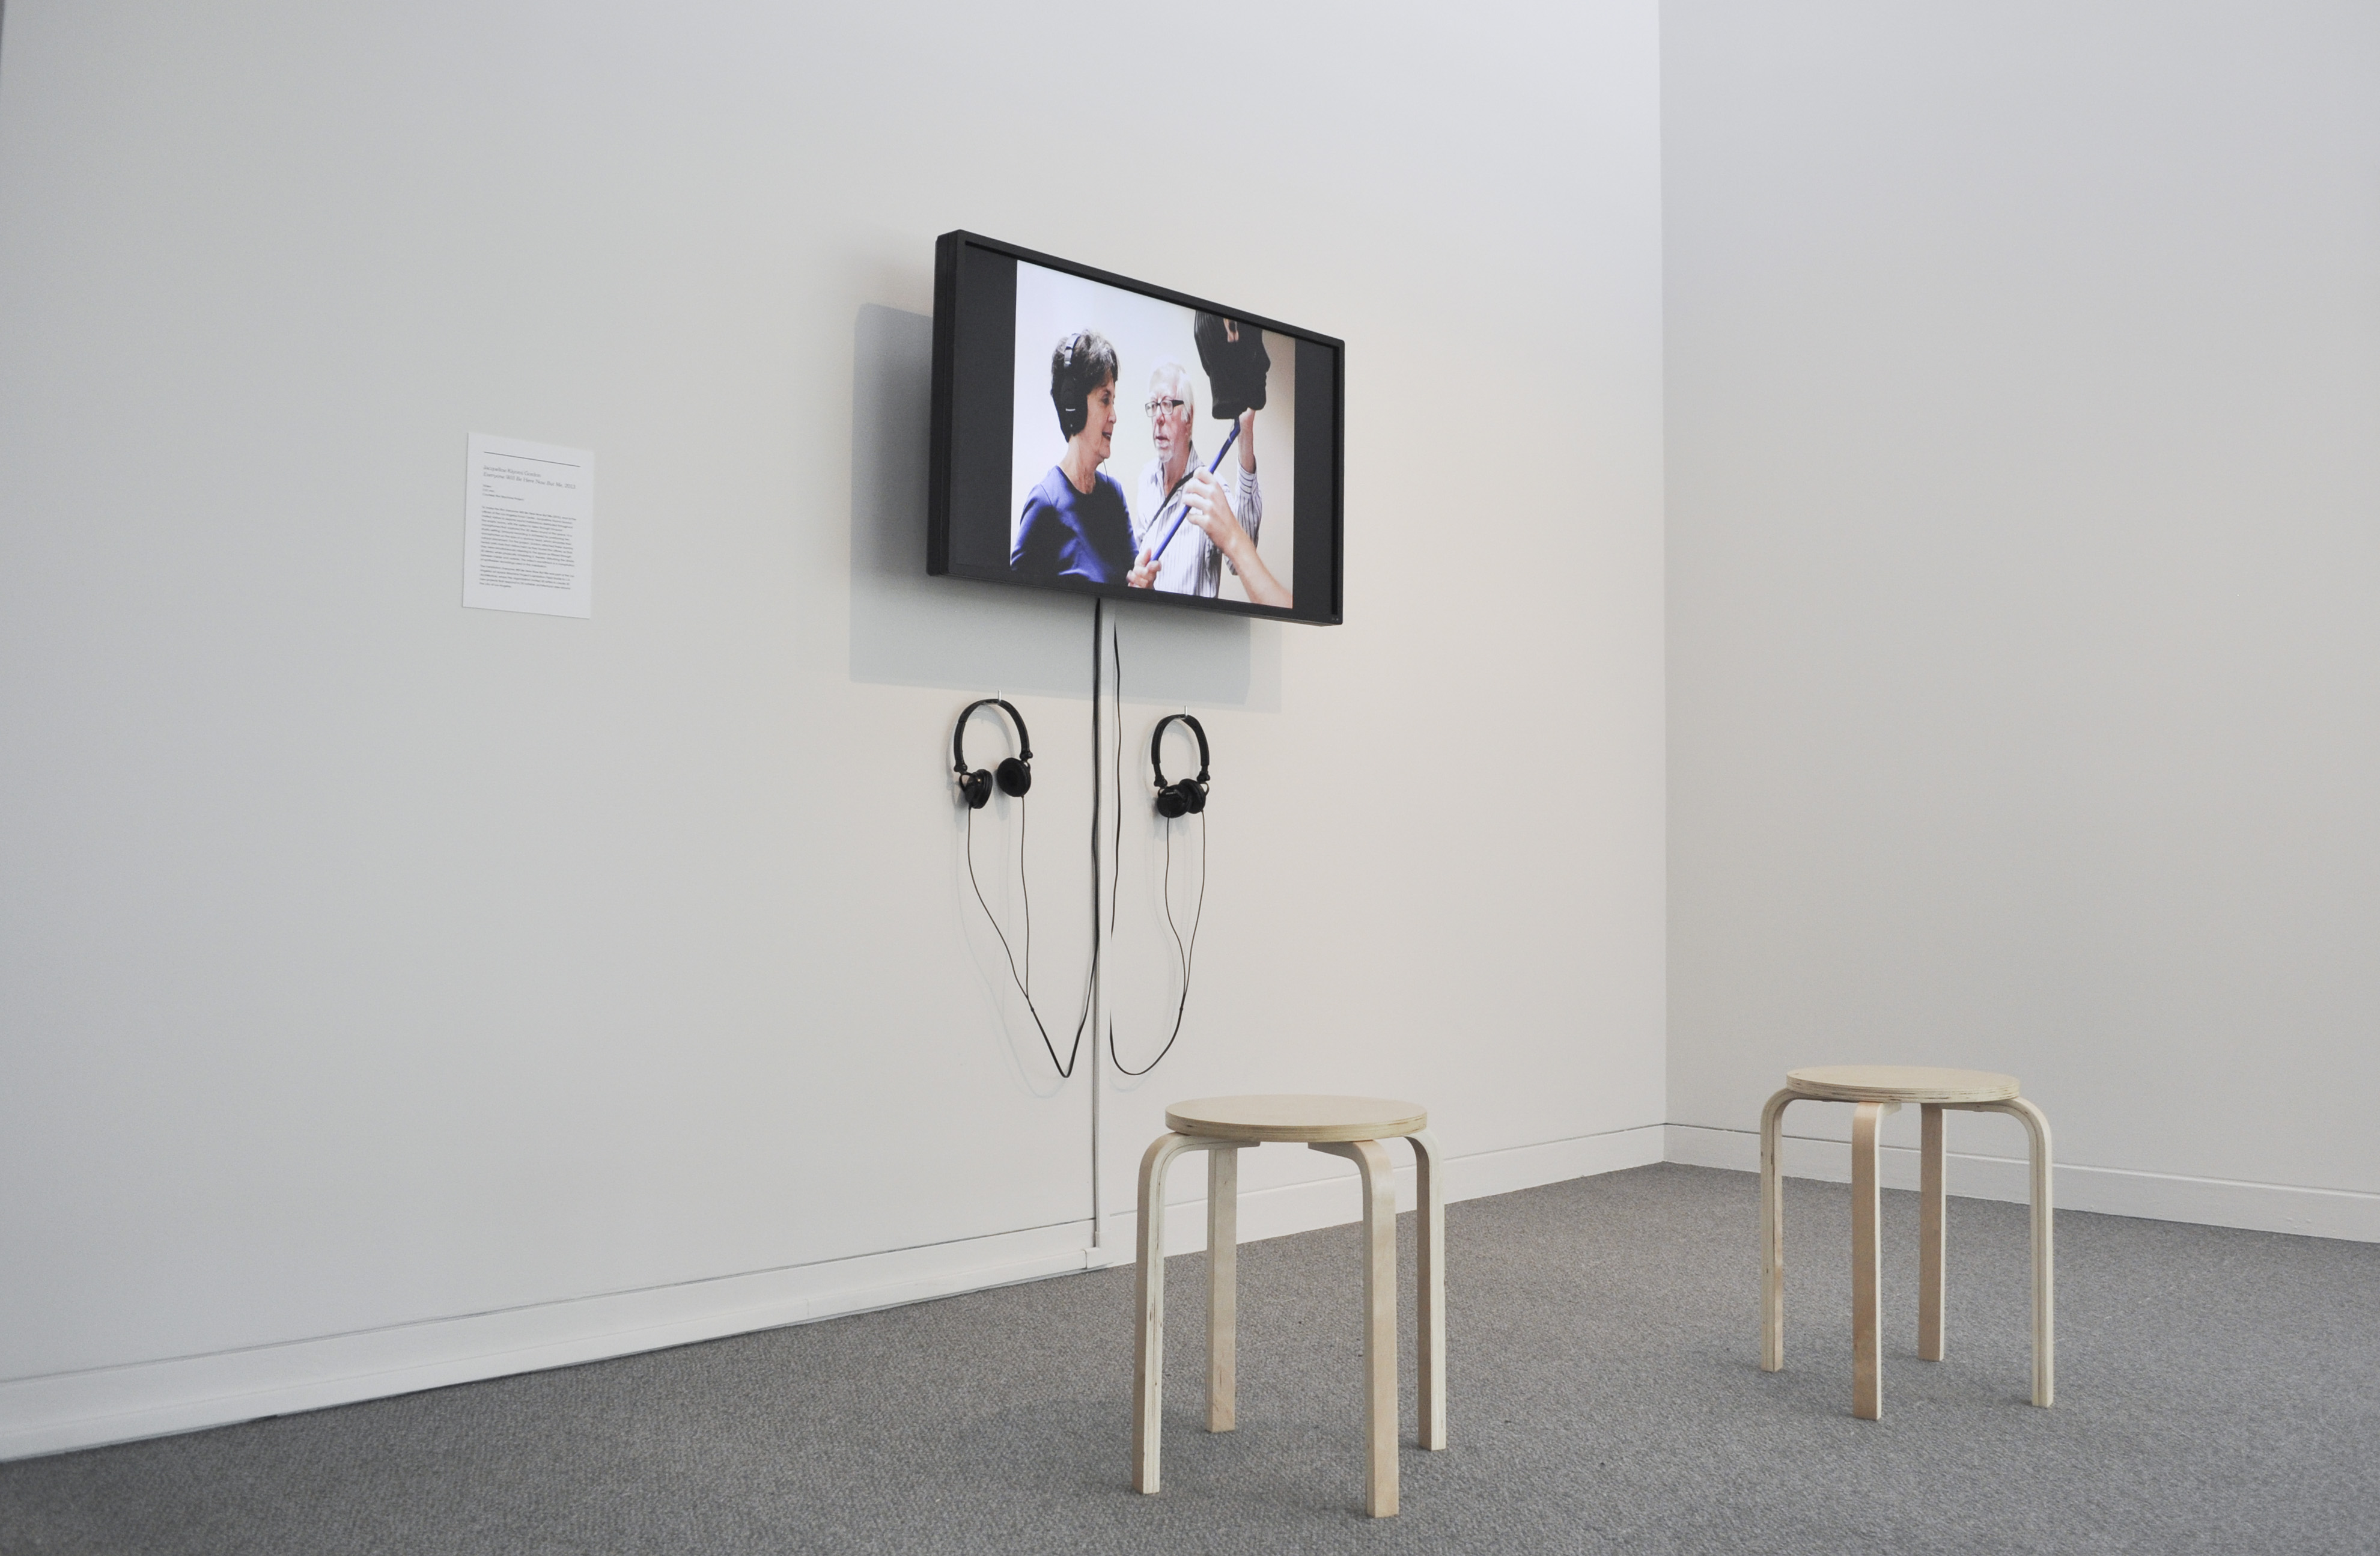 Jacqueline Kiyomi Gork,
Everyone Will Be Here Now But Me, 2013
Video
3:51 min
Courtesy the Machine Project